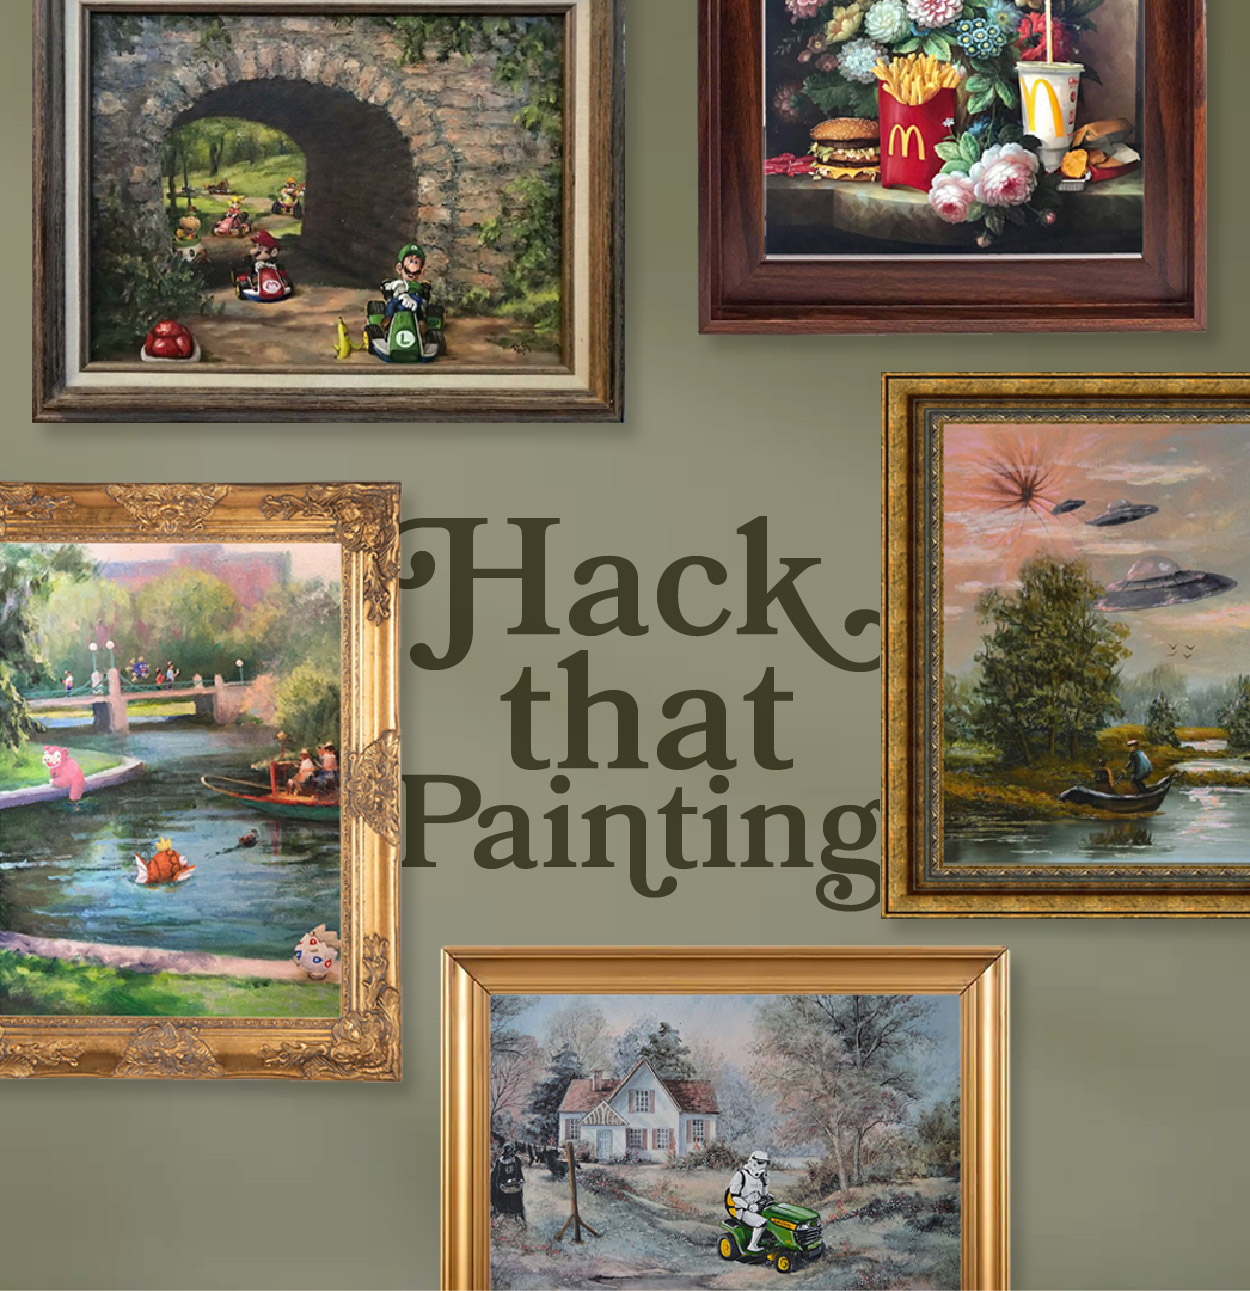 Hack that Painting